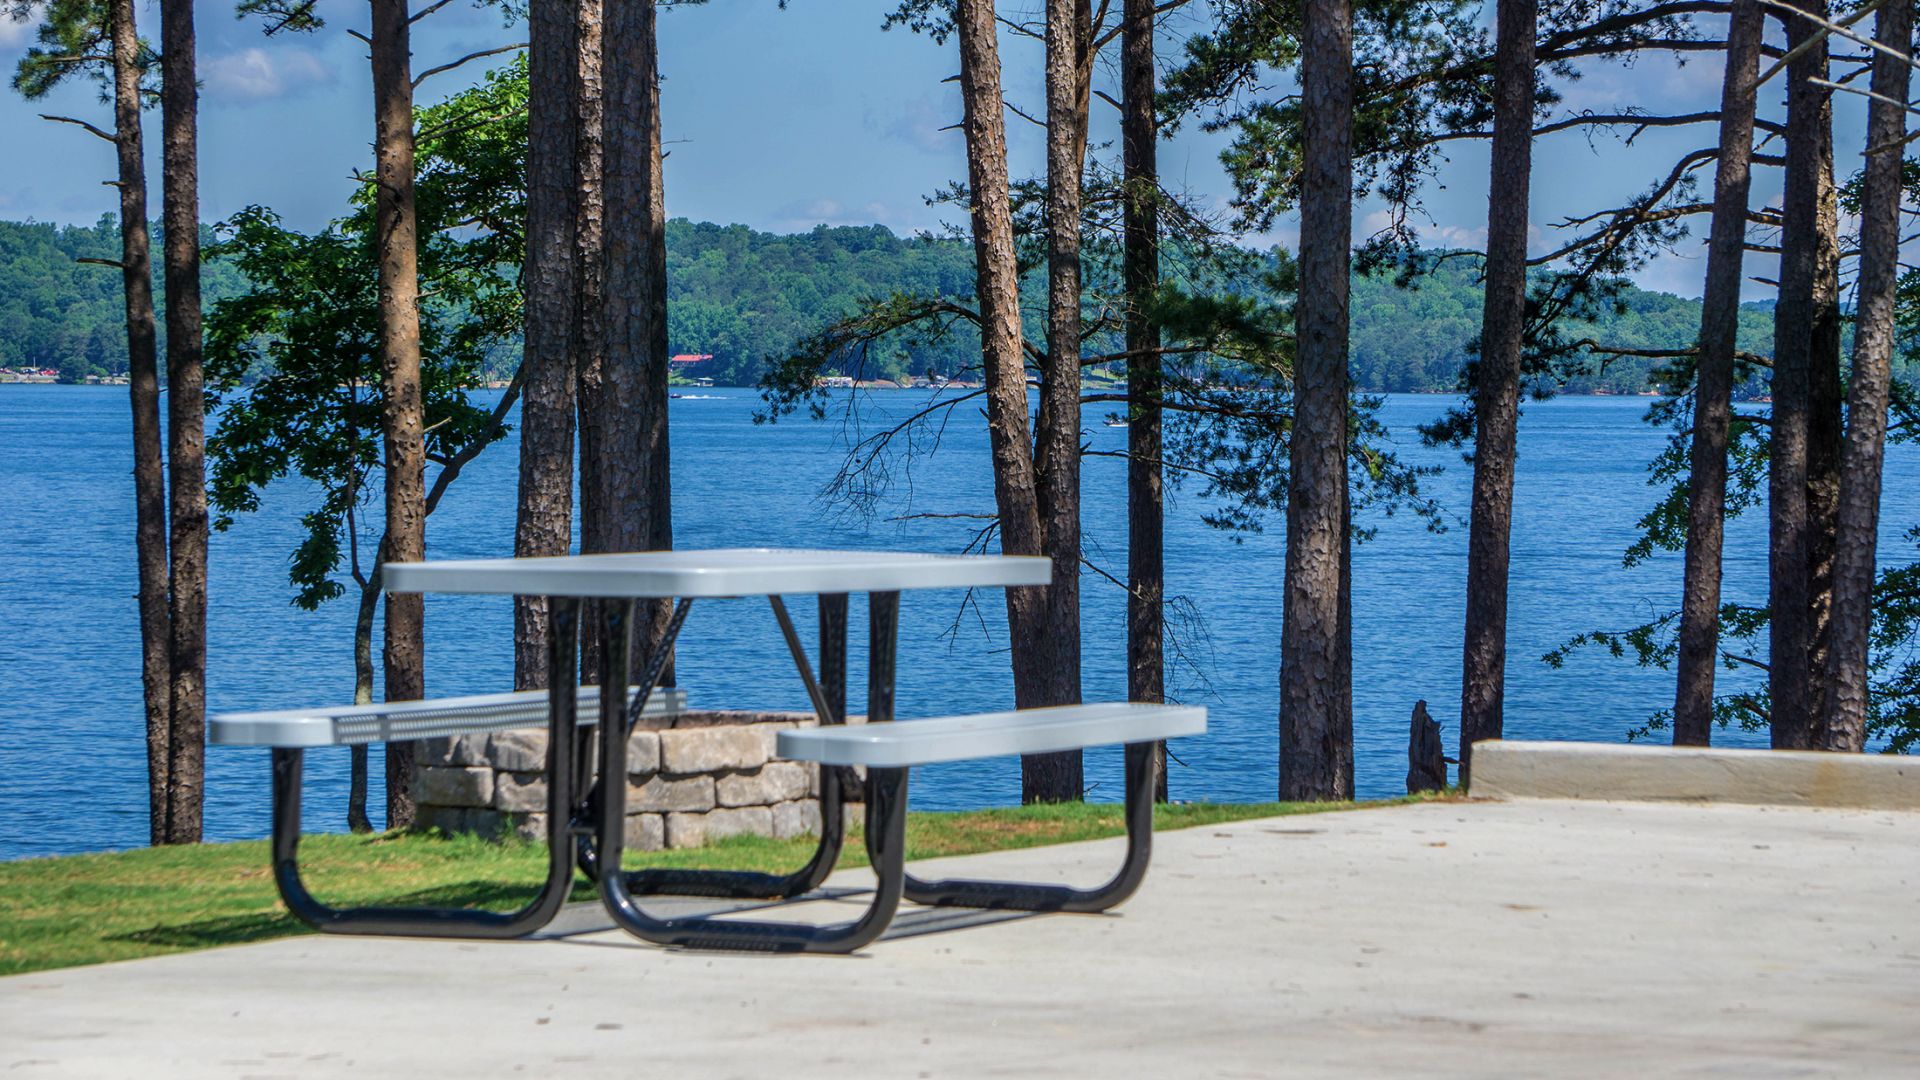 An Empty Park Bench Next To A Body Of Water